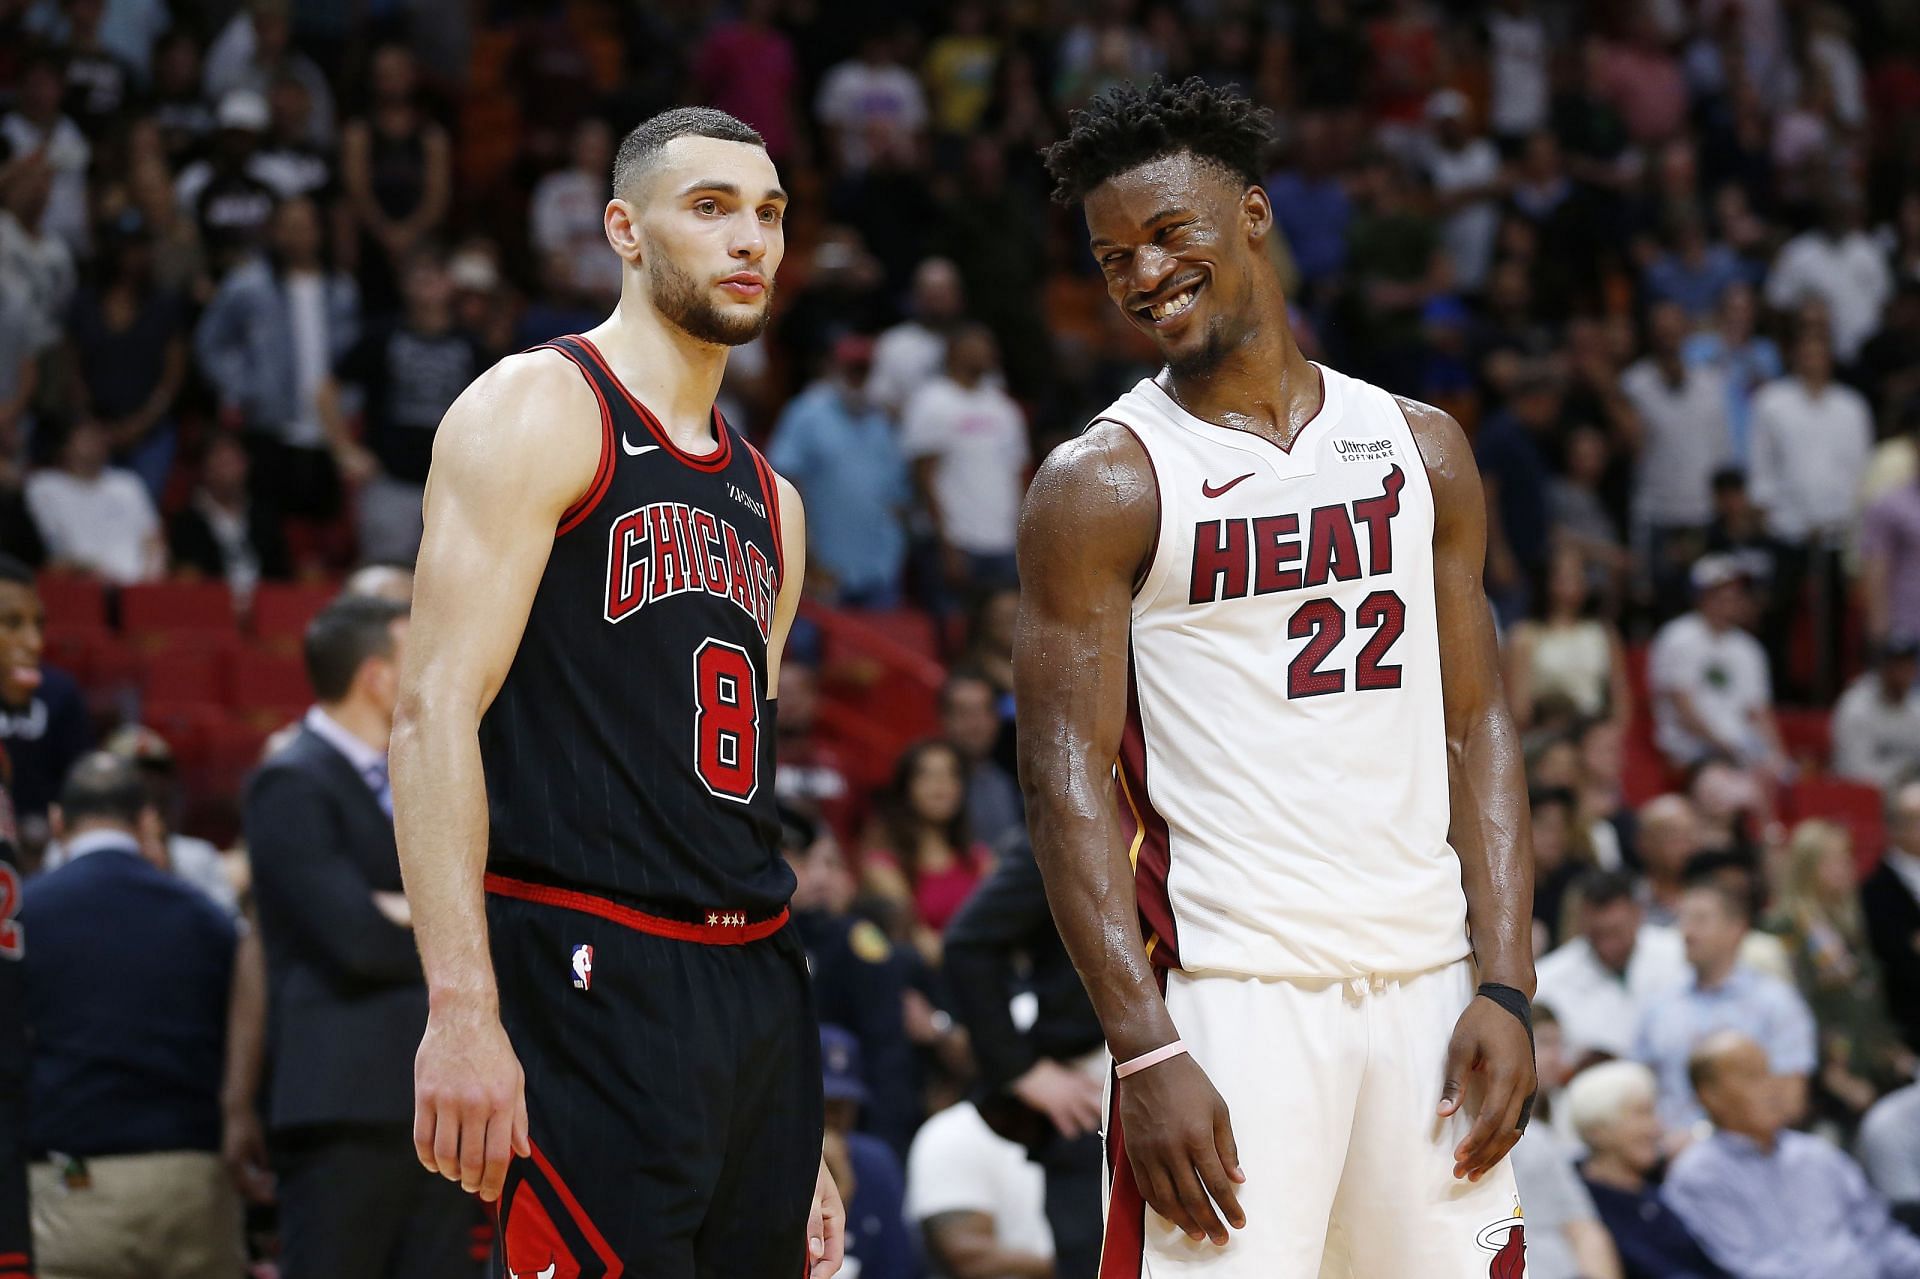 Zach LaVine of the Chicago Bulls and Jimmy Butler of the Miami Heat